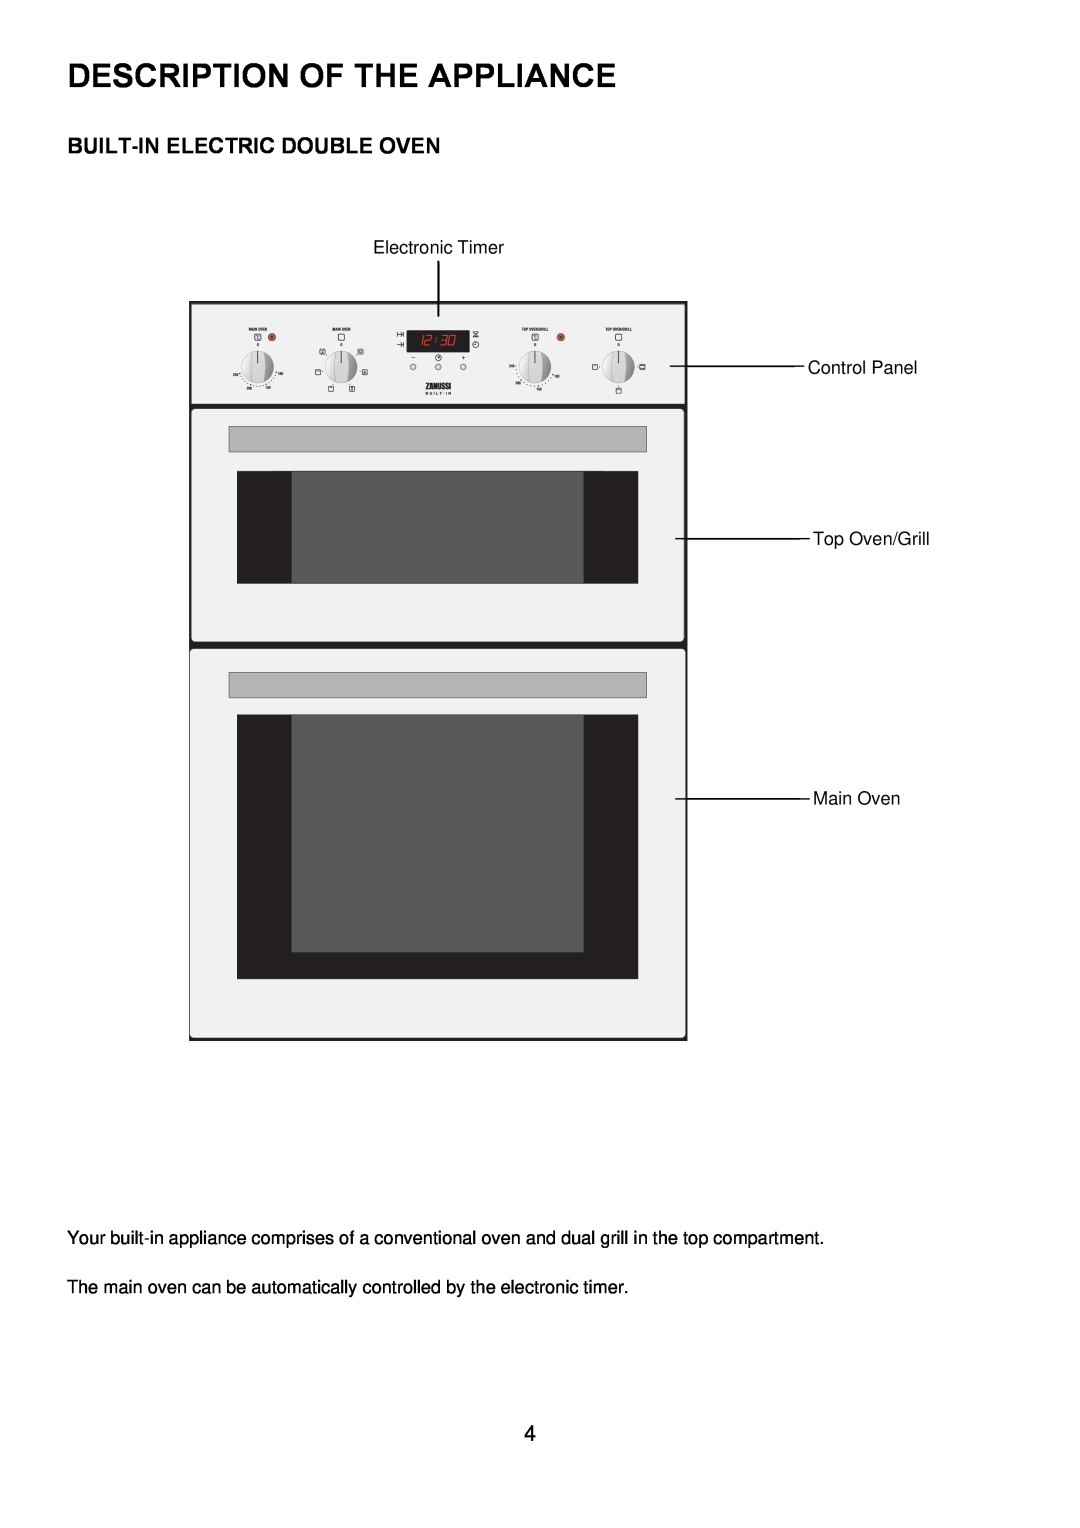 Zanussi ZOD 890 manual Description Of The Appliance, Built-In Electric Double Oven 